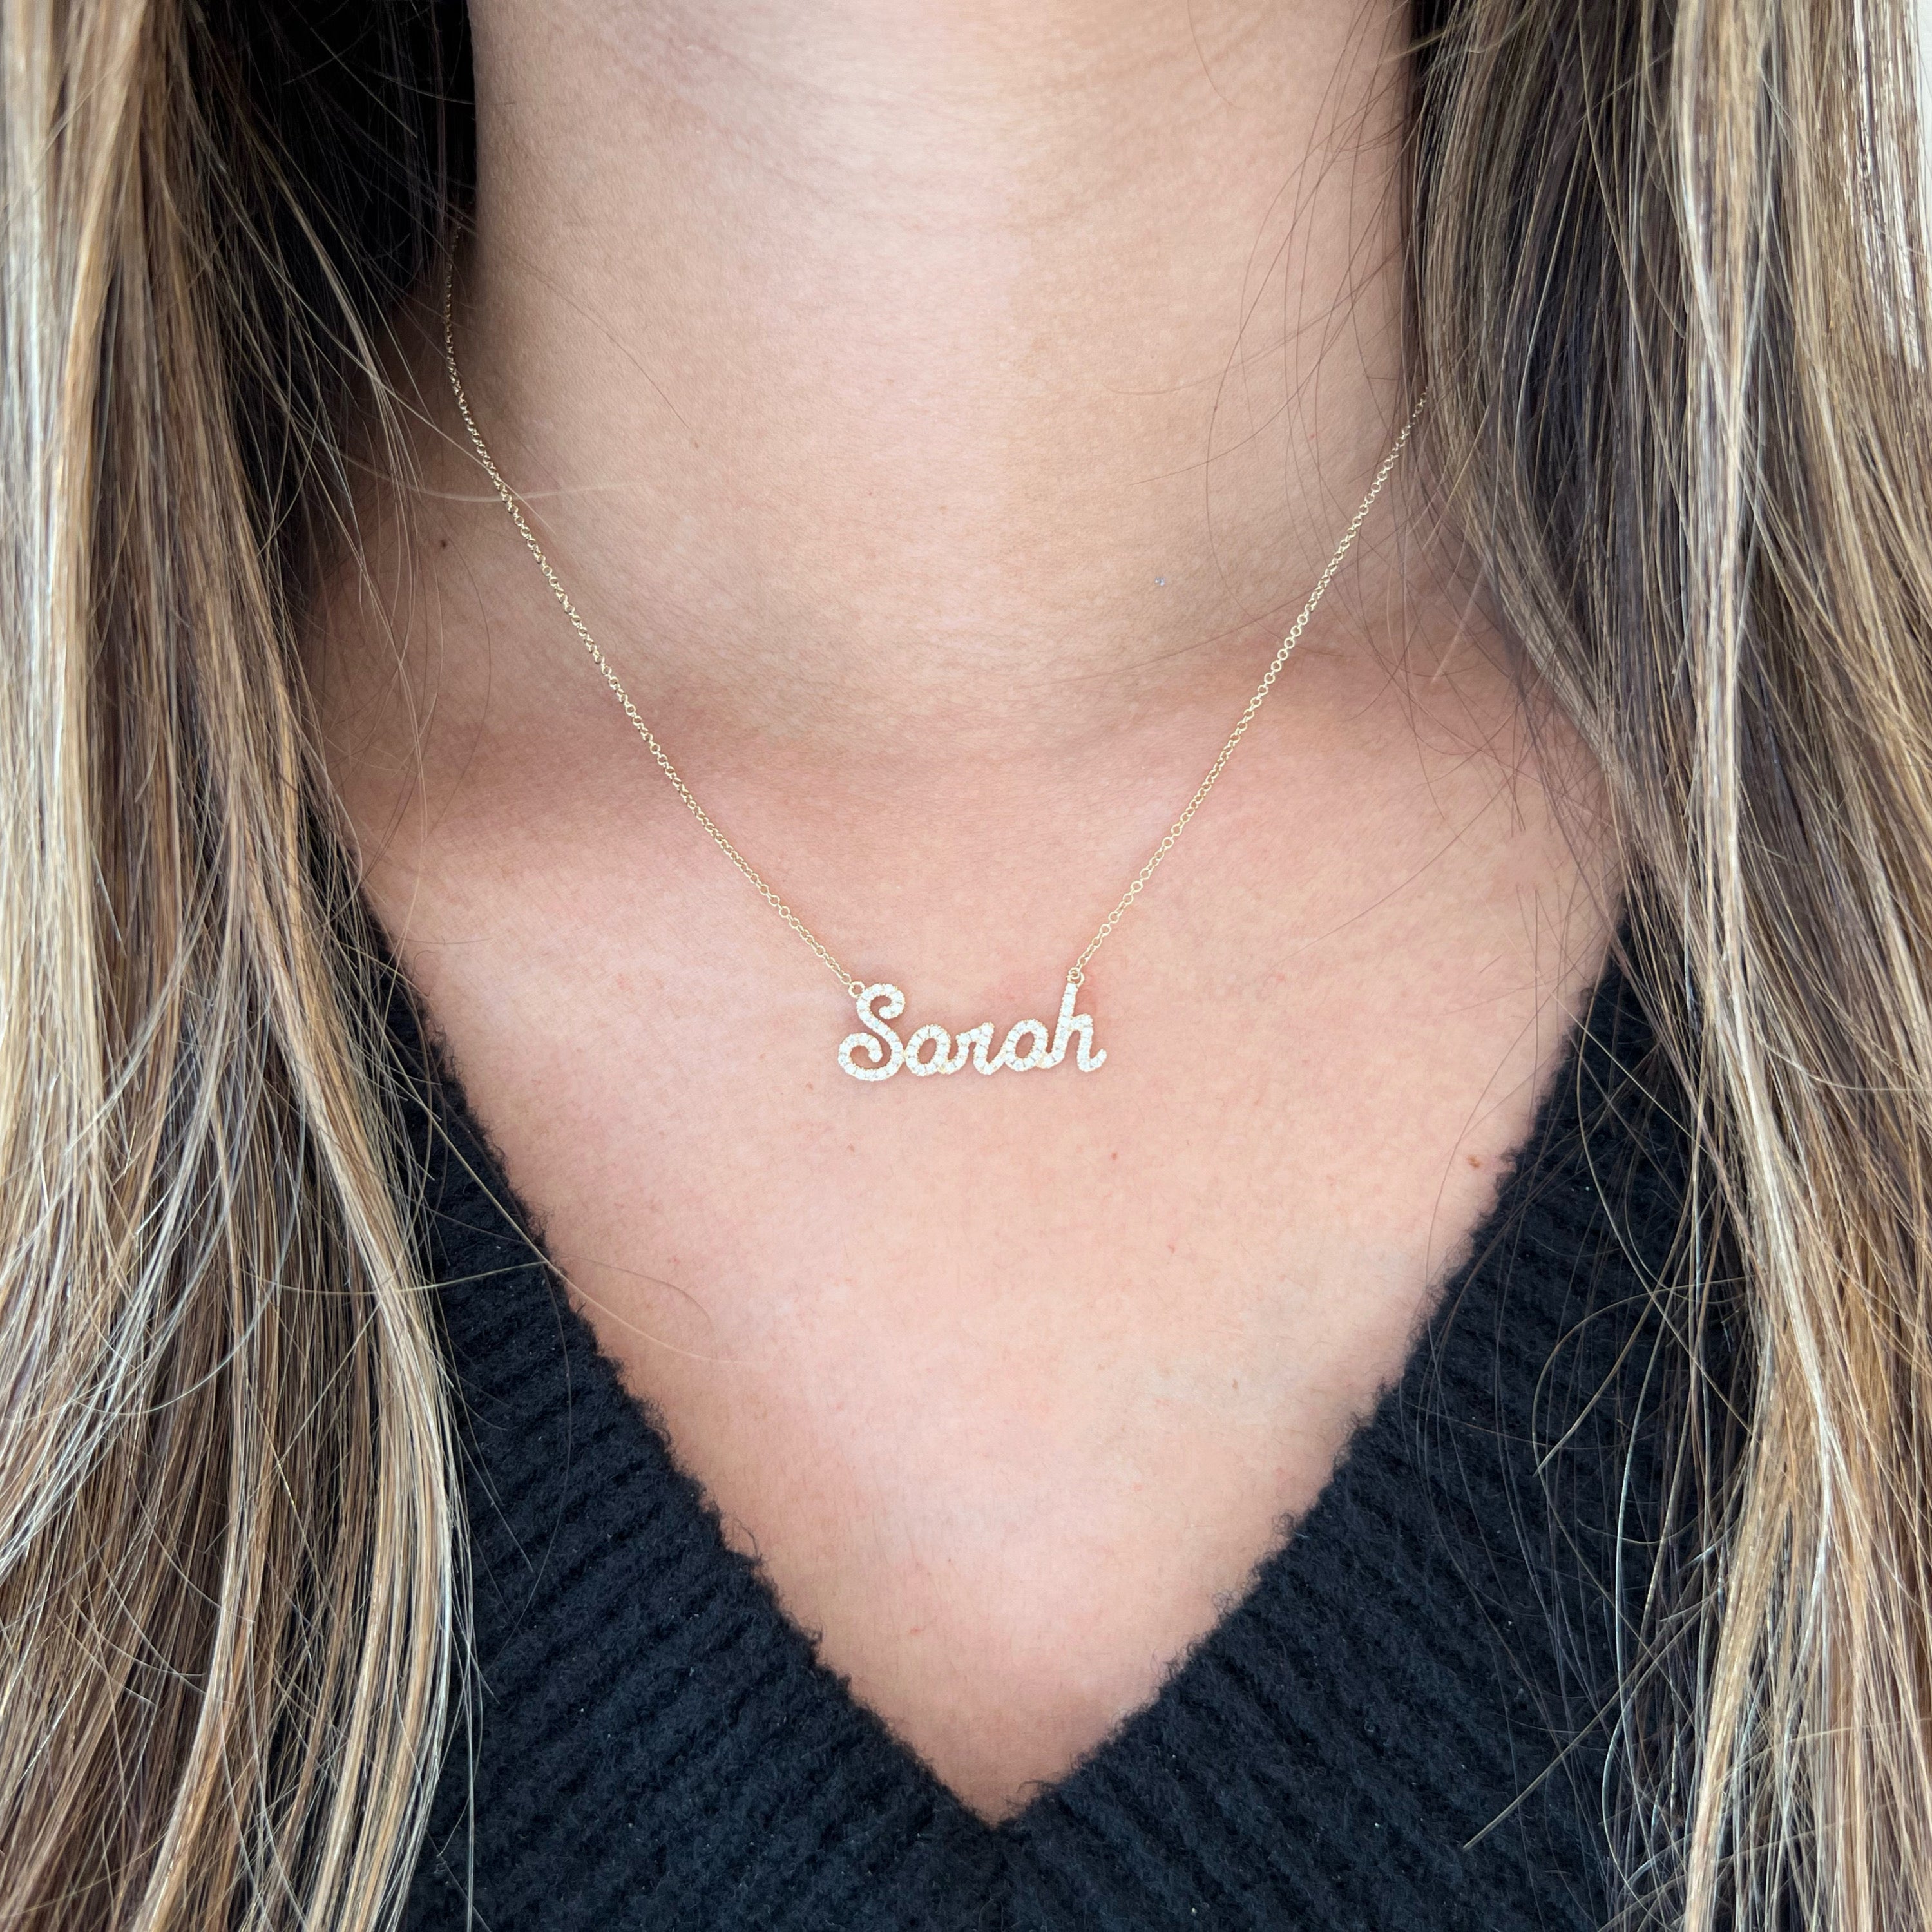 Cut Tone Nameplate Necklace - The M Jewelers